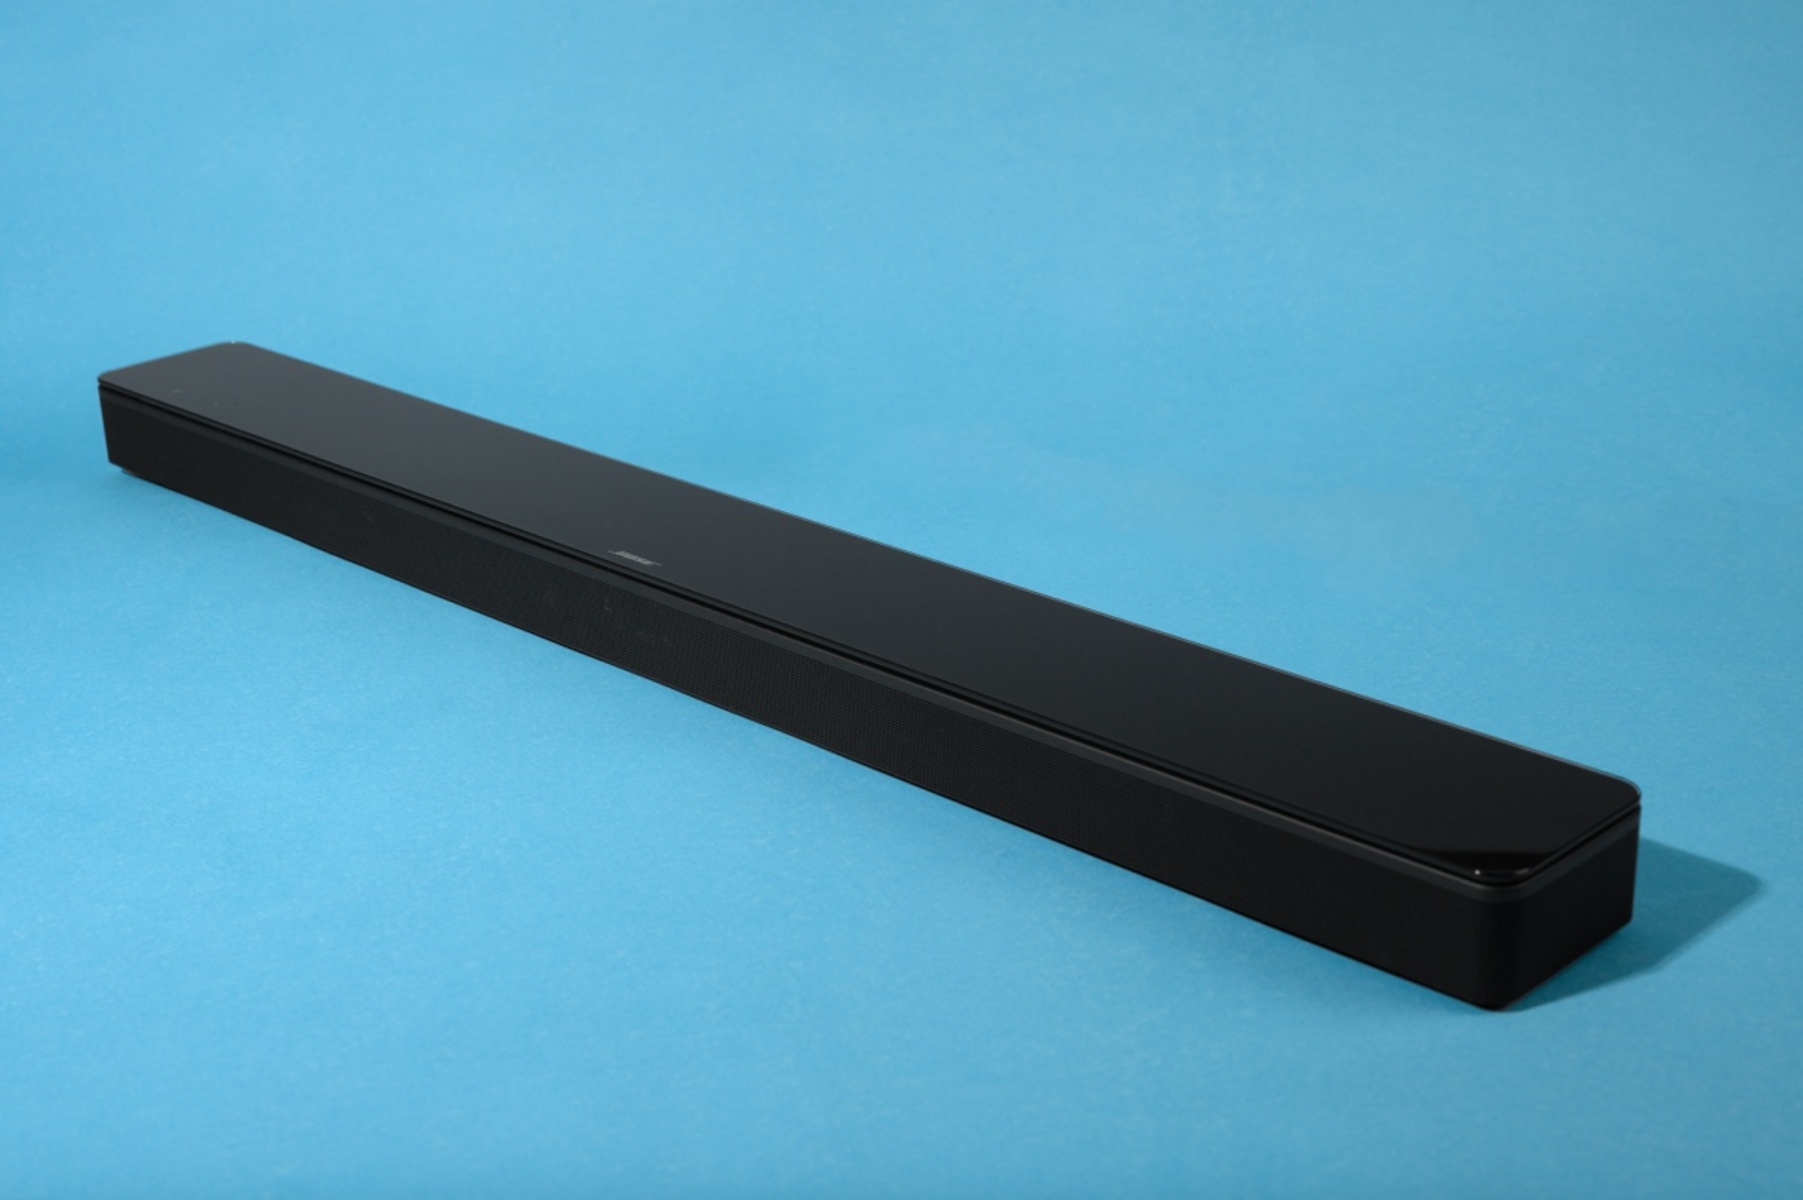 How To Connect To Bose Soundbar 700